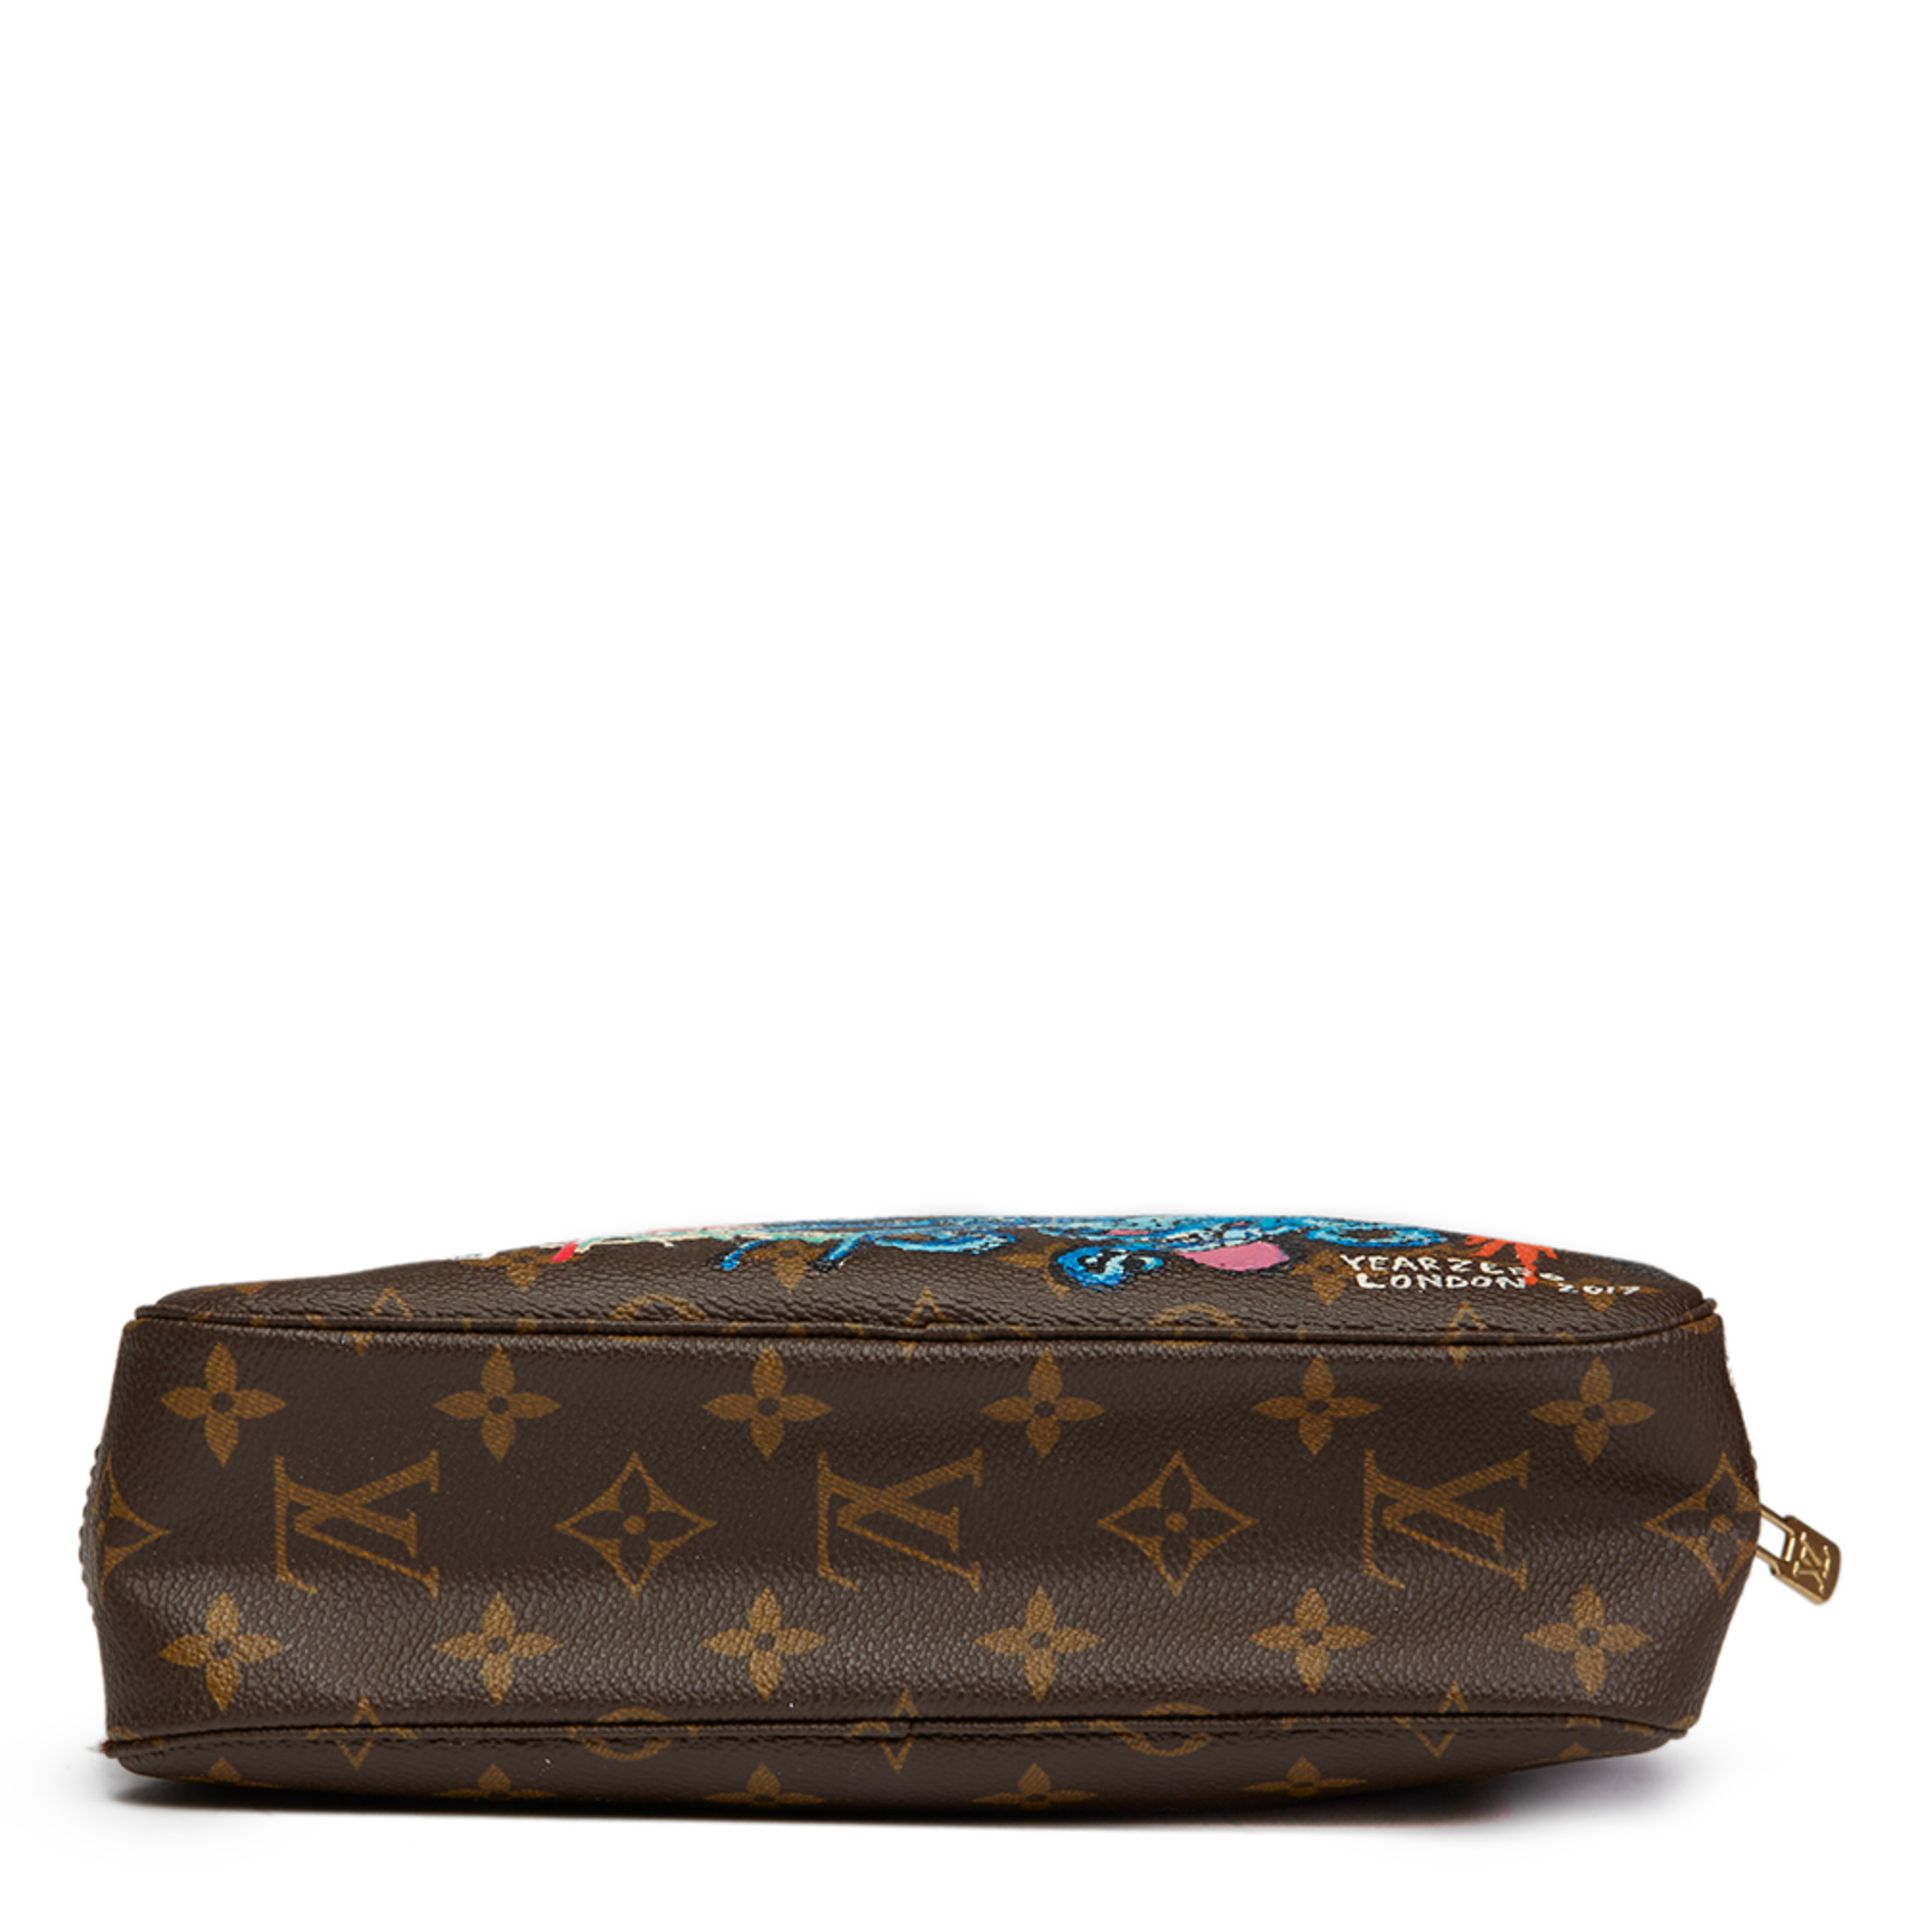 Louis Vuitton Hand-painted 'Sick of it all' X Year Zero London Toiletry Pouch - Image 3 of 11